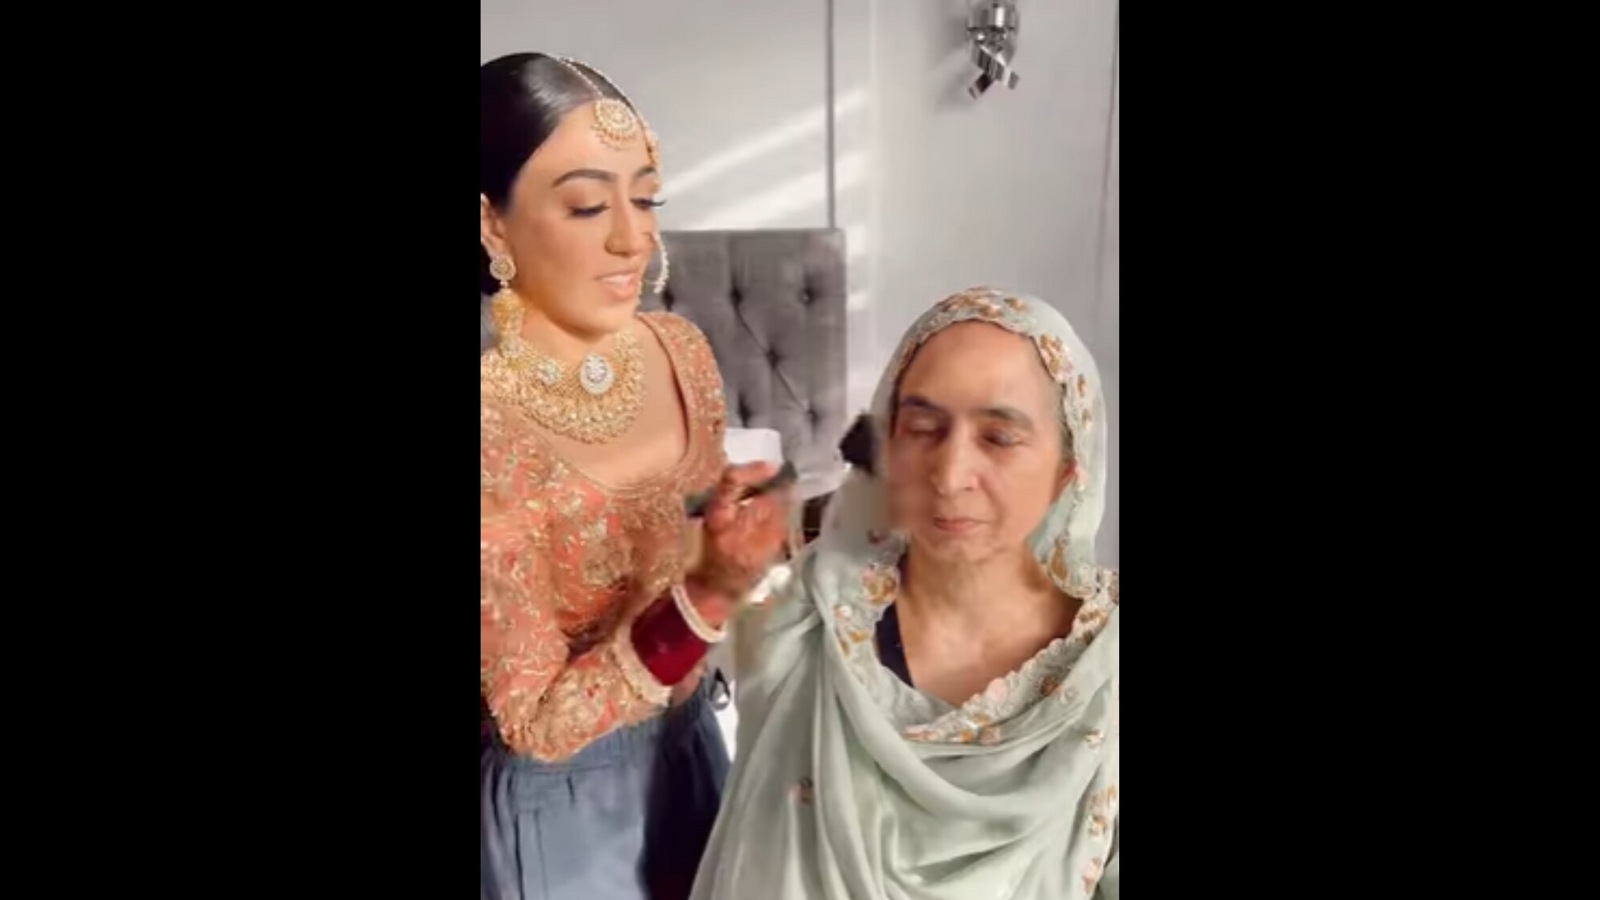 Bride does mom’s makeup at own wedding, mom ‘only trusted her.’ Watch | Trending